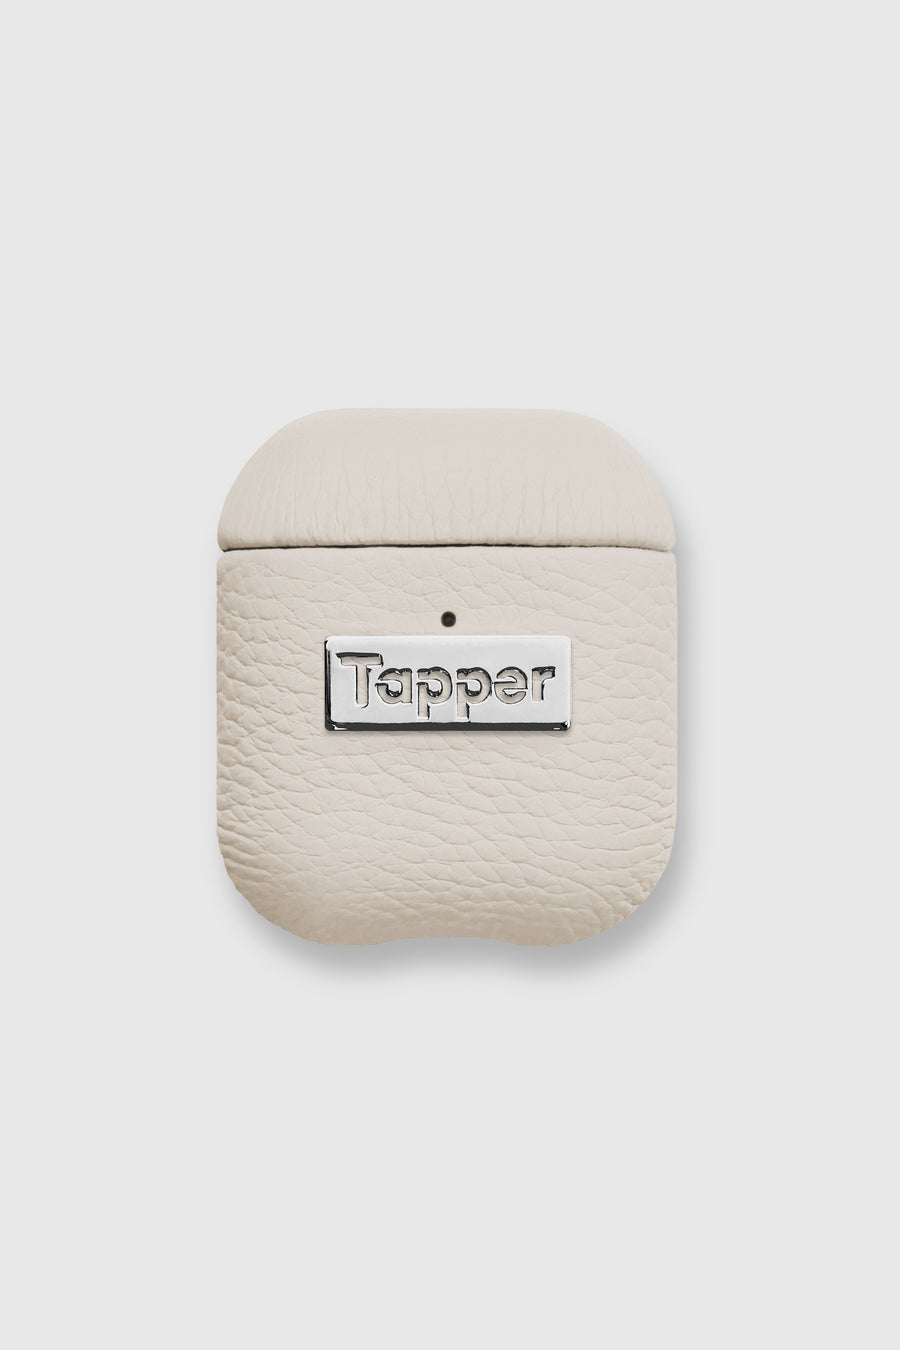 Tapper's luxurious sand beige genuine lamb leather AirPods case protects and elevates the look of your AirPods. The luxurious, protective case for AirPods with a metal logo plate colored in silver steps up your AirPods game. The next must-have high end protective Apple AirPods accessory in real leather and metal details. Compatible with AirPods (1st and 2nd generation). Designed in Sweden by Tapper. Free Express Shipping at gettapper.com